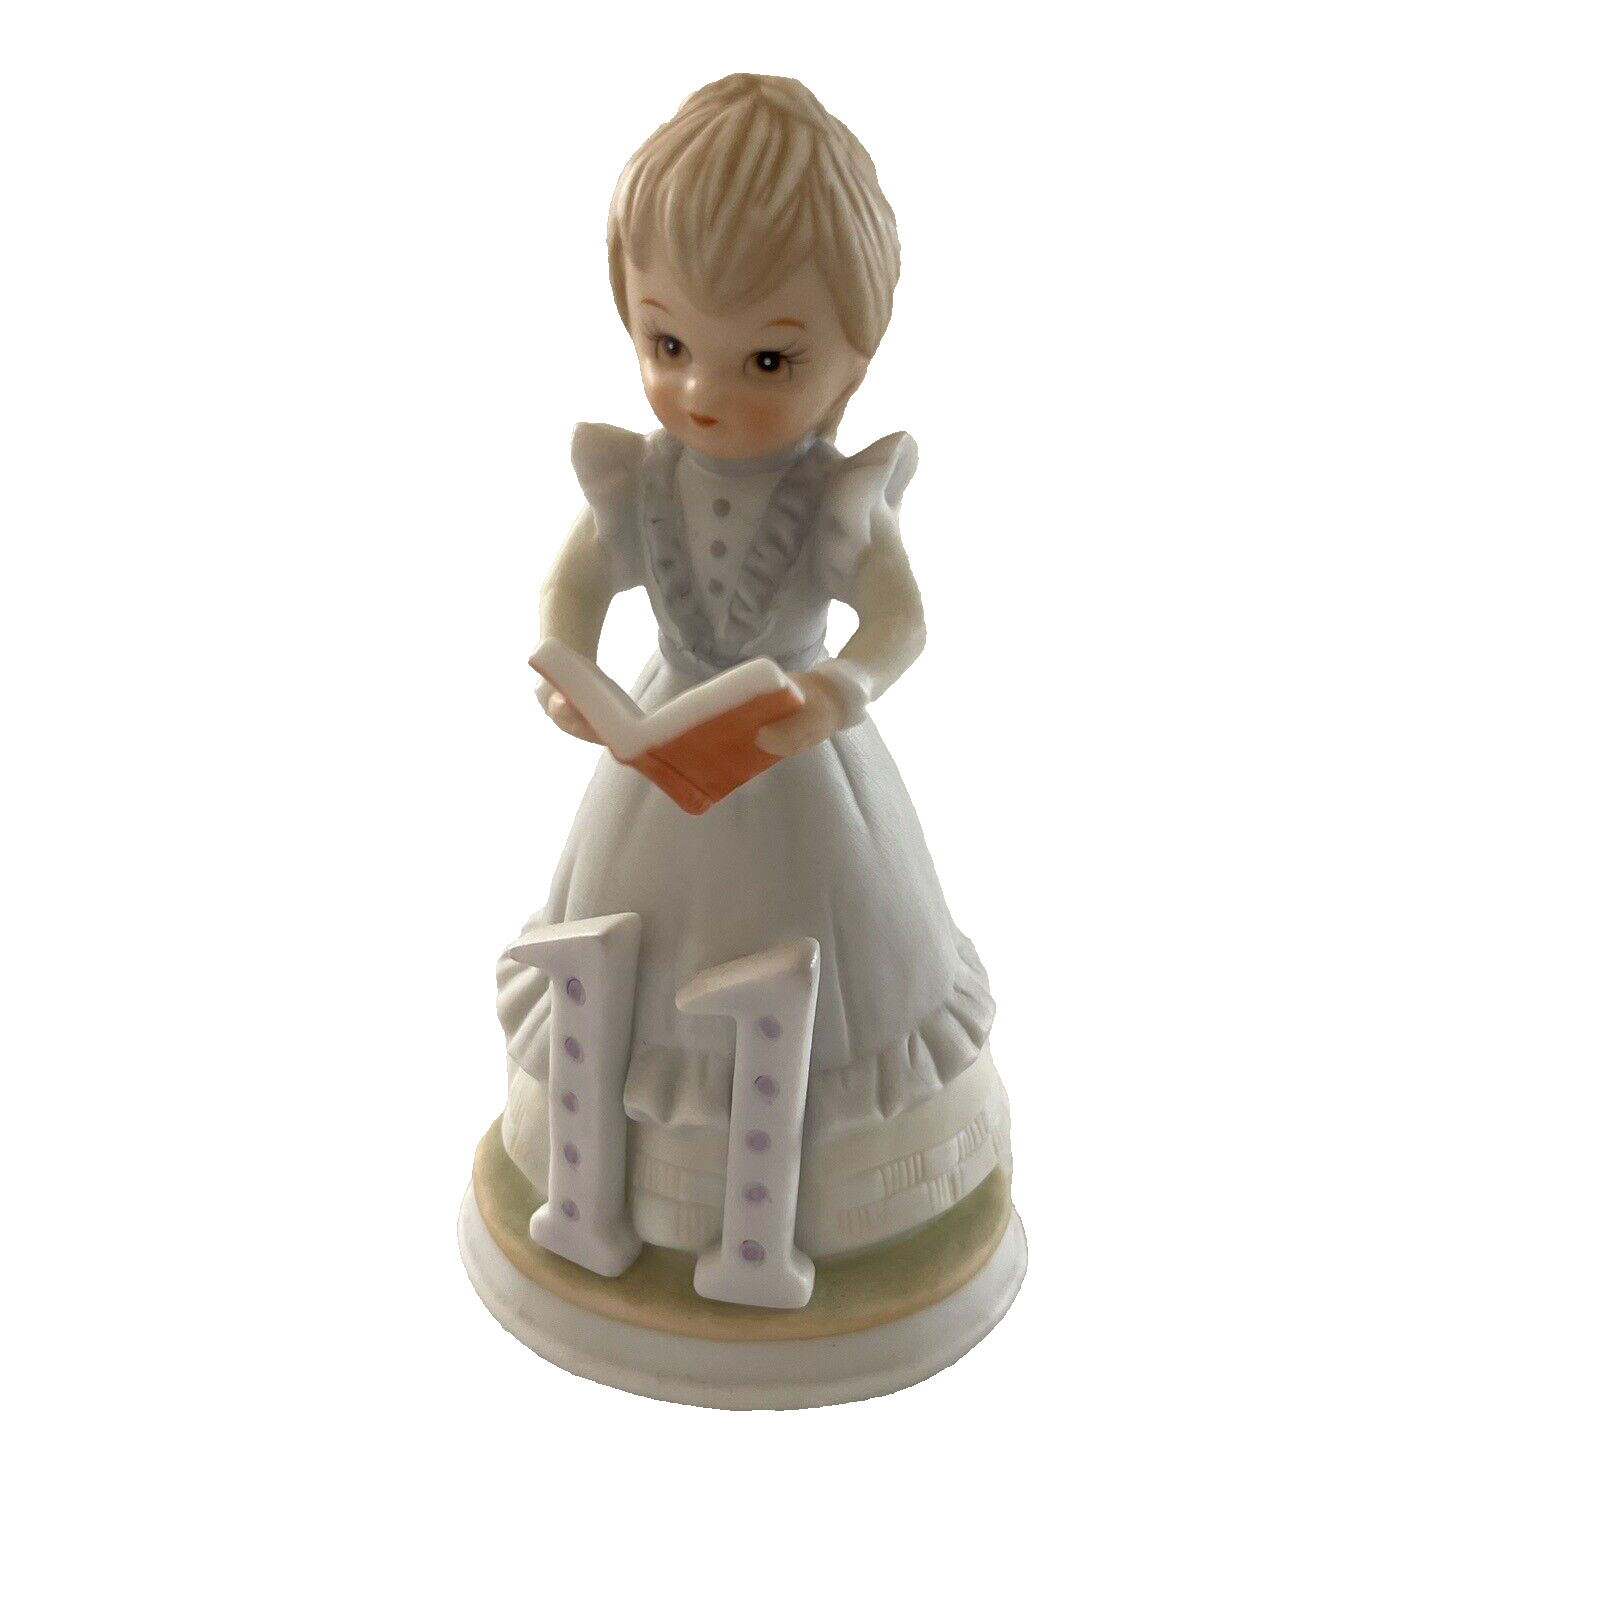 Lefton The Christopher Collection Birthday Age 11 Girl Porcelain Figurine 1983